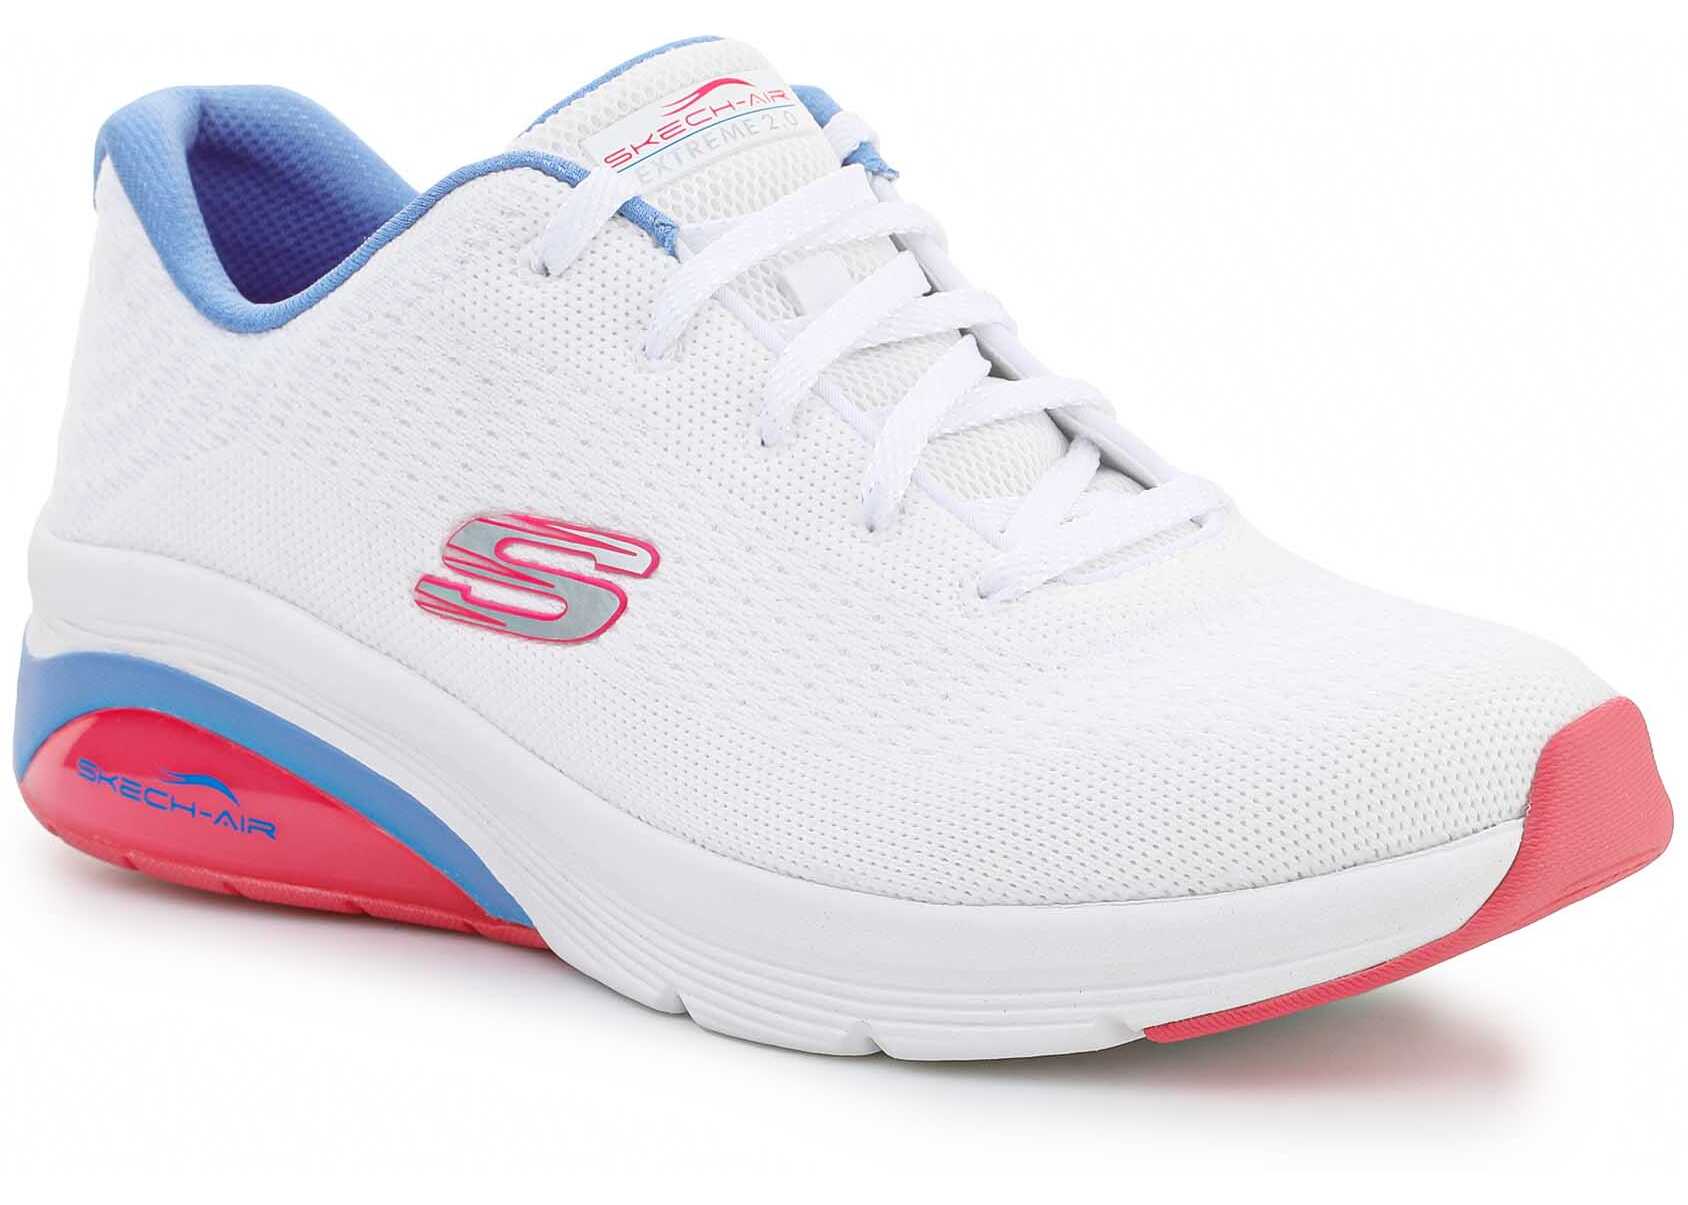 SKECHERS Skech-Air Extreme 2.0 Classic Vibe White/Black/Pink White